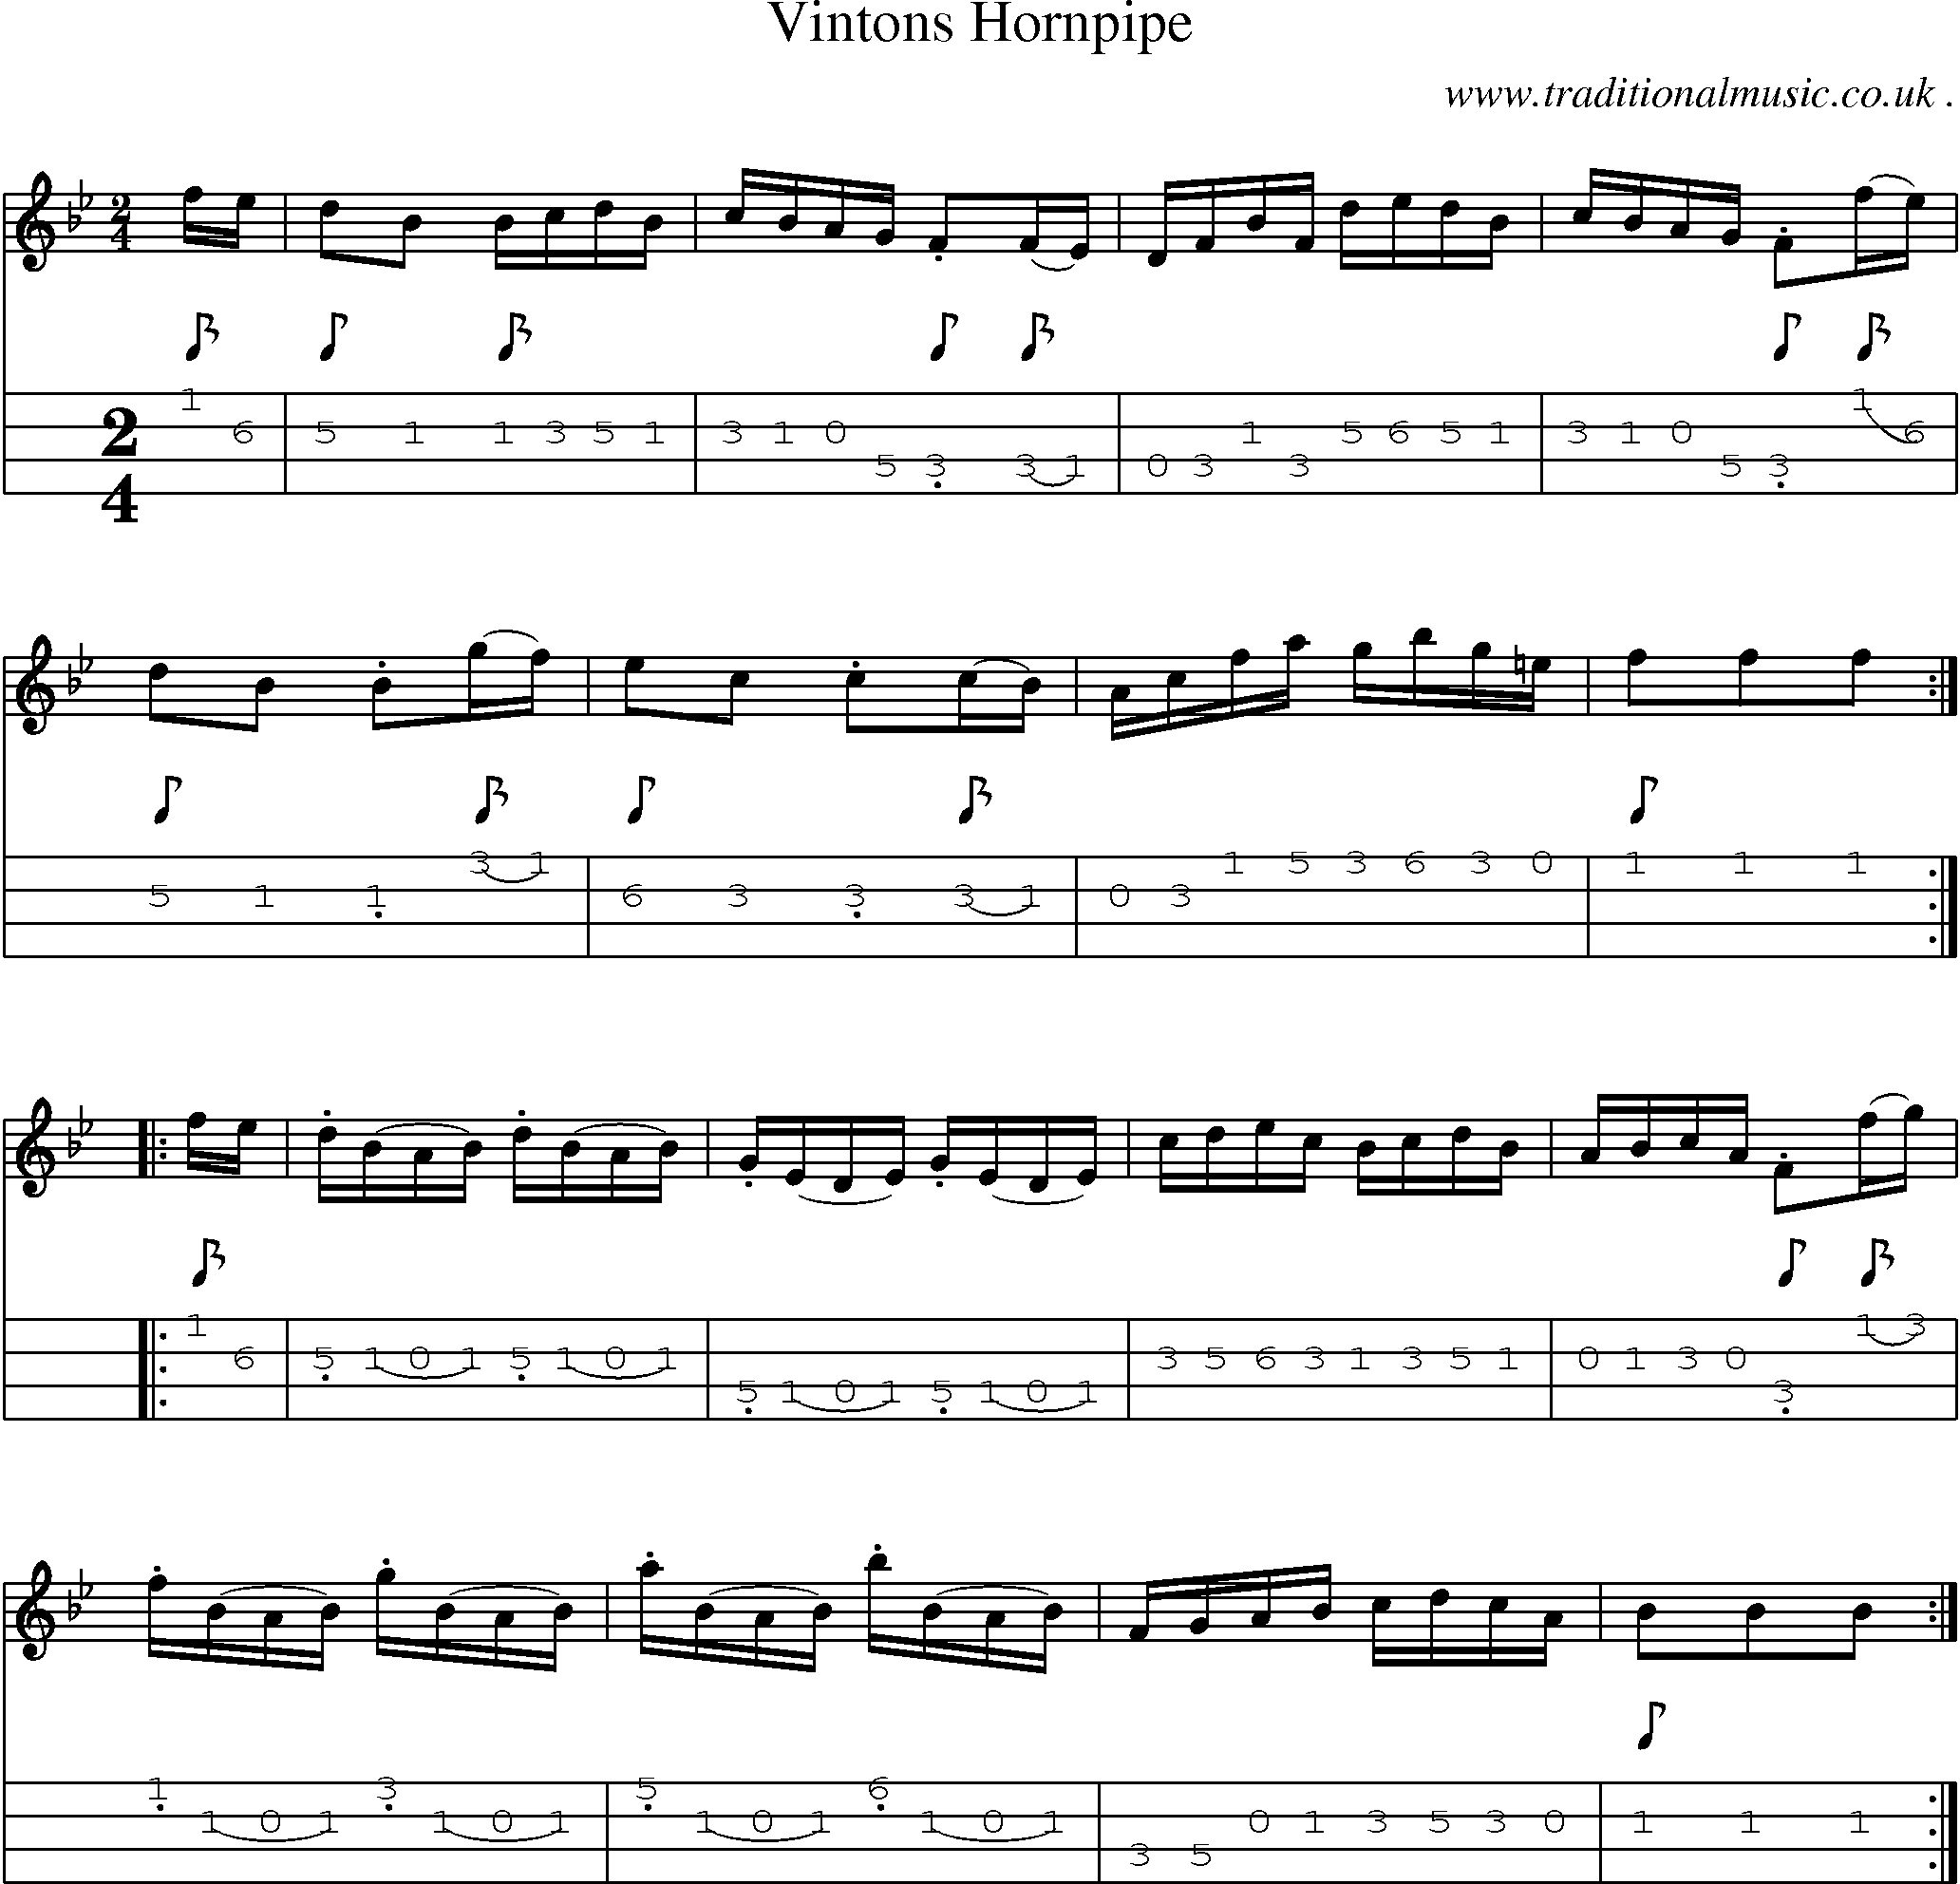 Sheet-Music and Mandolin Tabs for Vintons Hornpipe